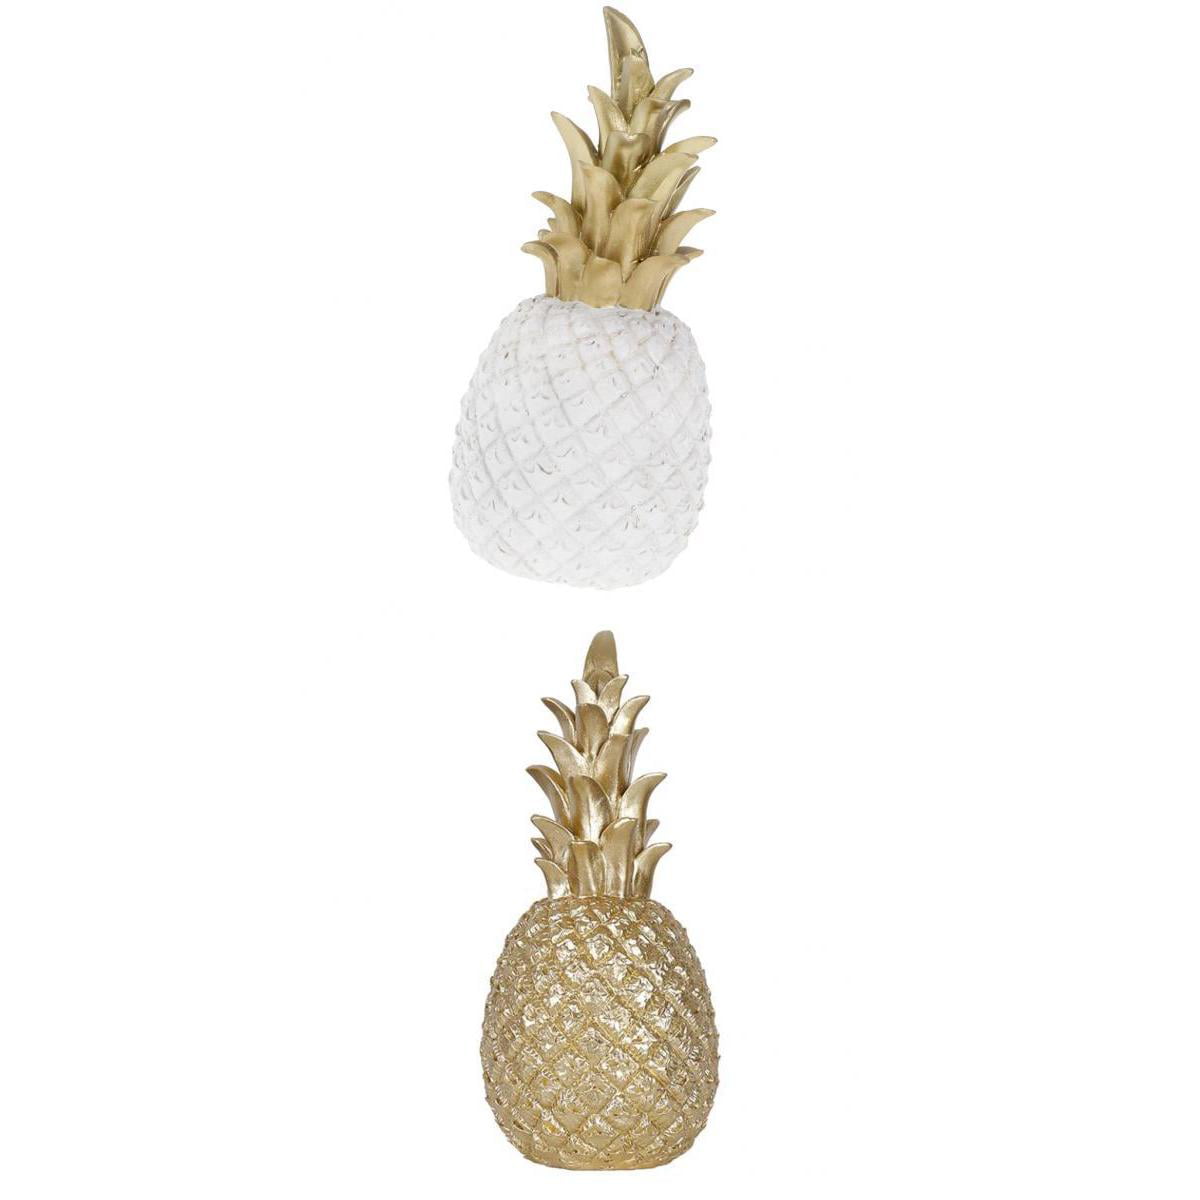 Set of 2 Resin Pineapple Showpiece Ornaments Housewarming Gift for Living Room 